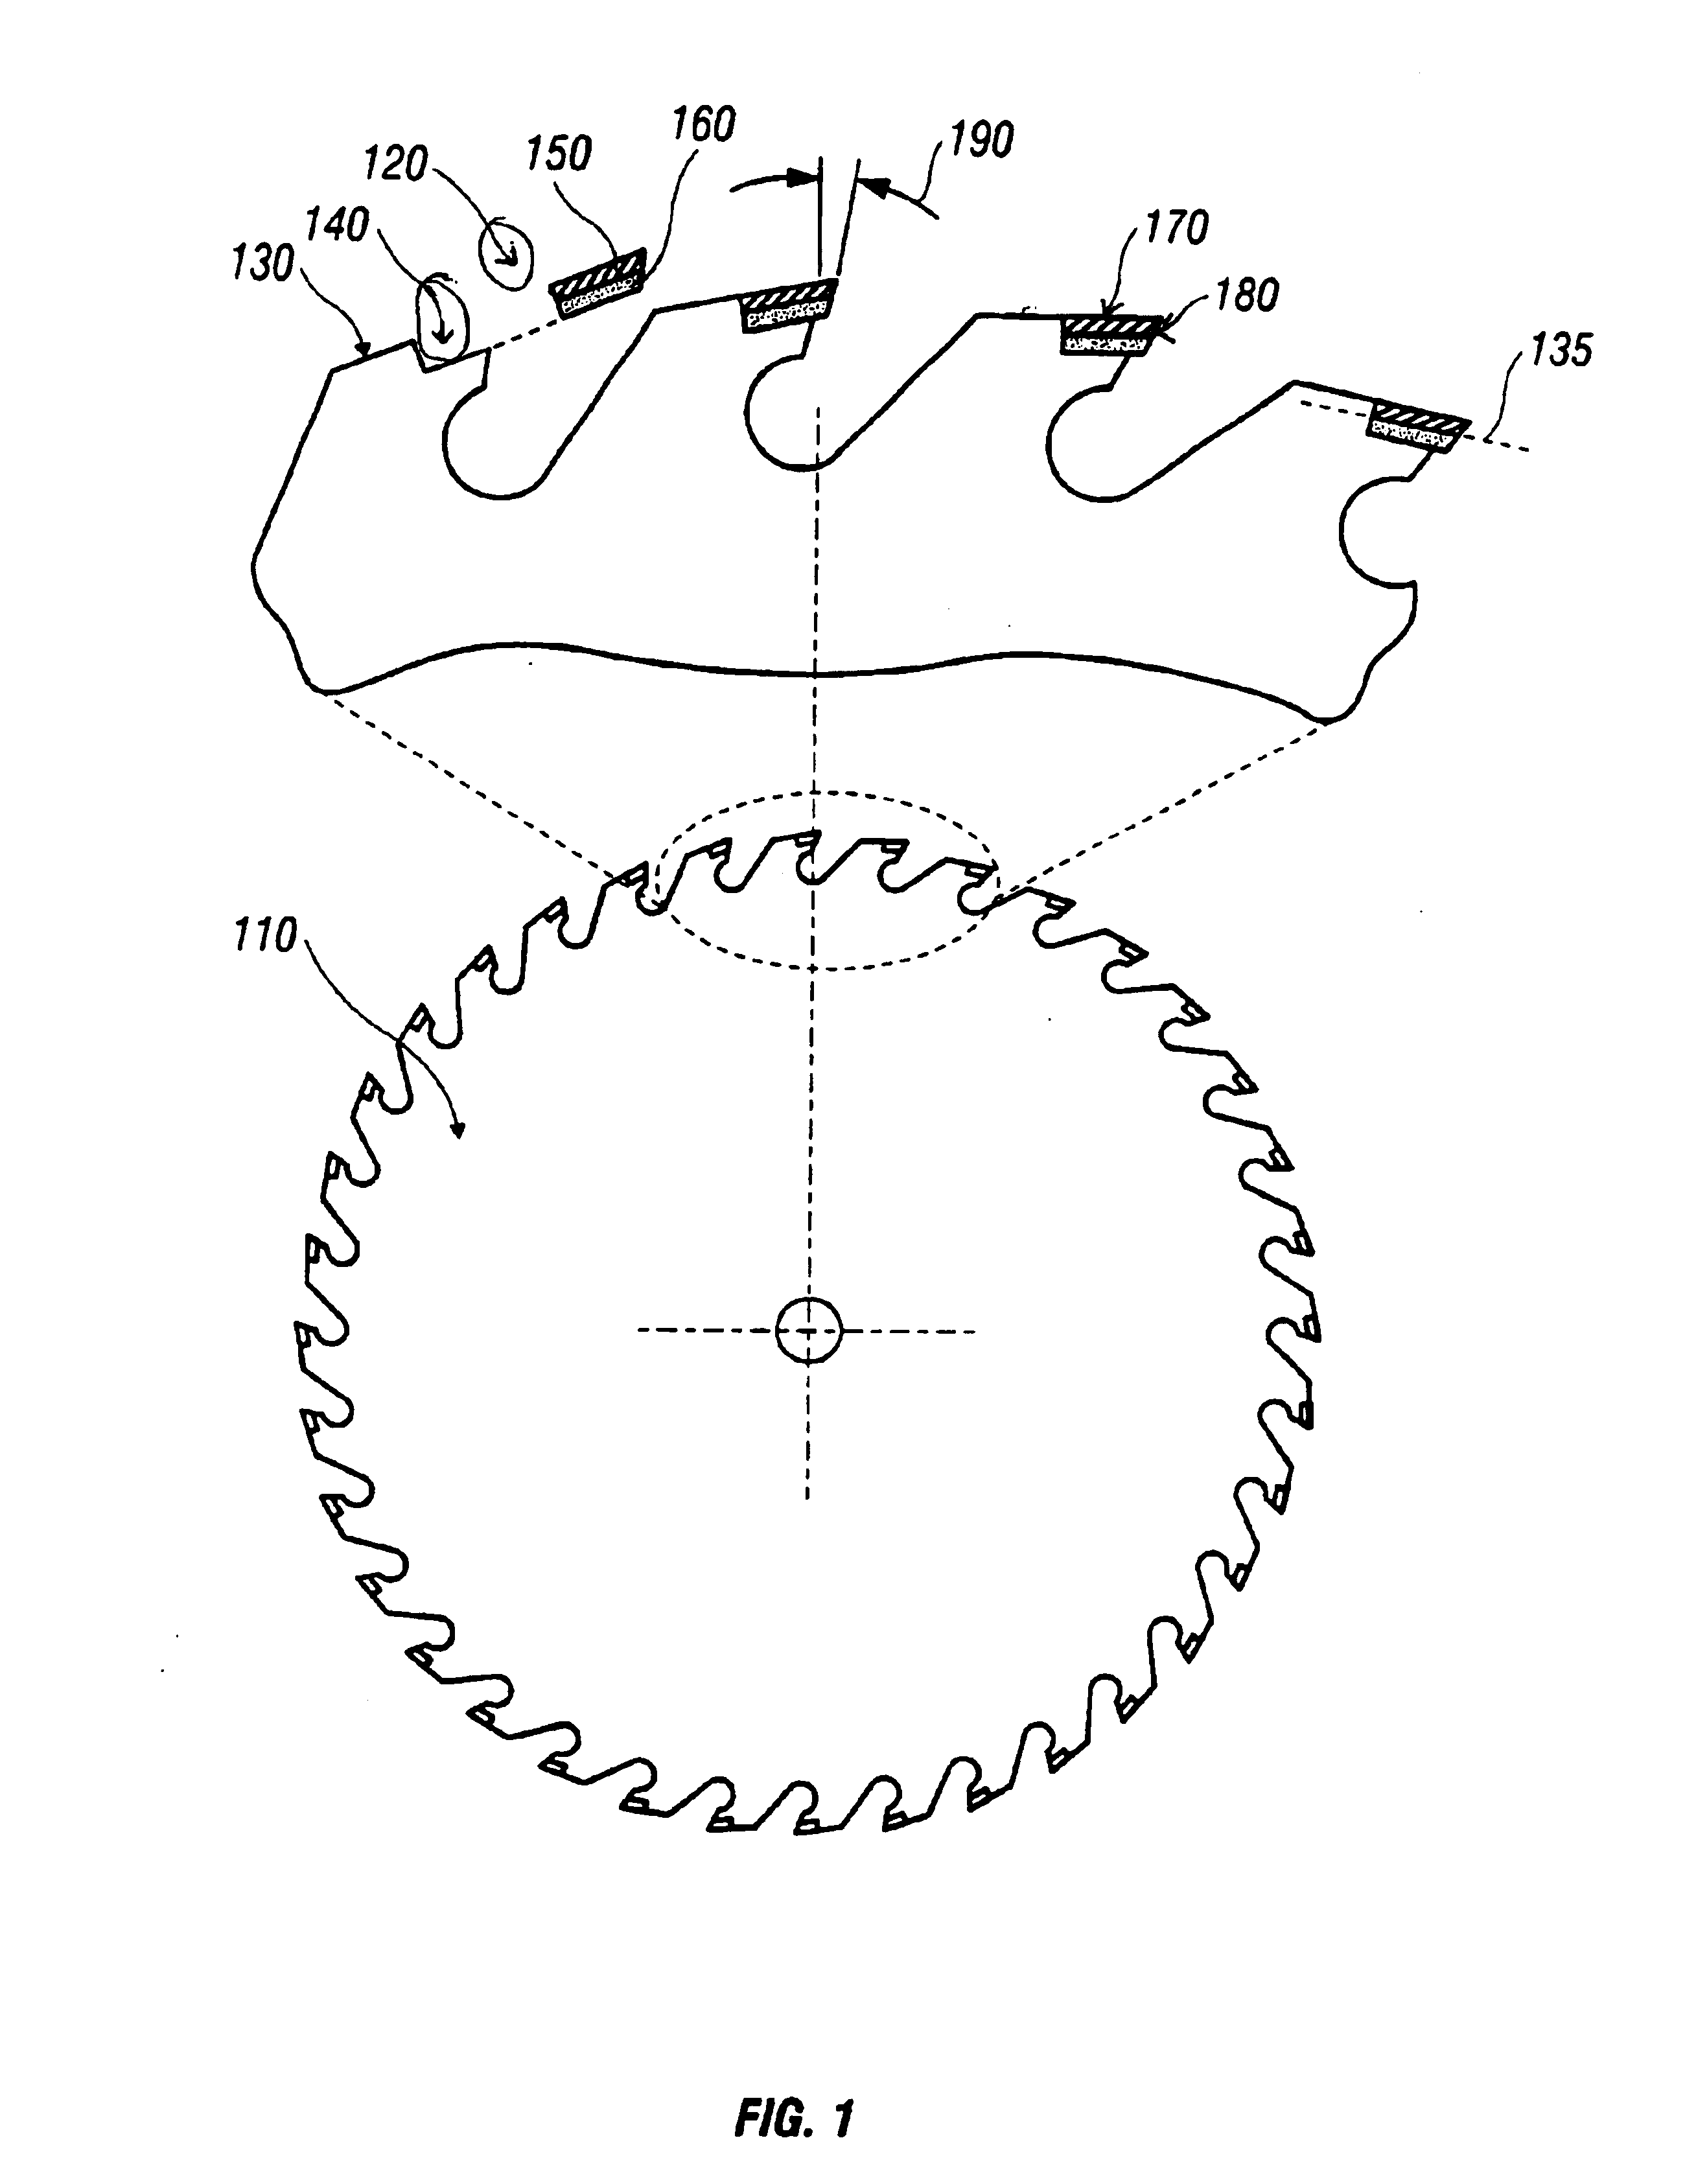 Method of fabricating circular saw blades with cutting teeth composed of ultrahard tool material